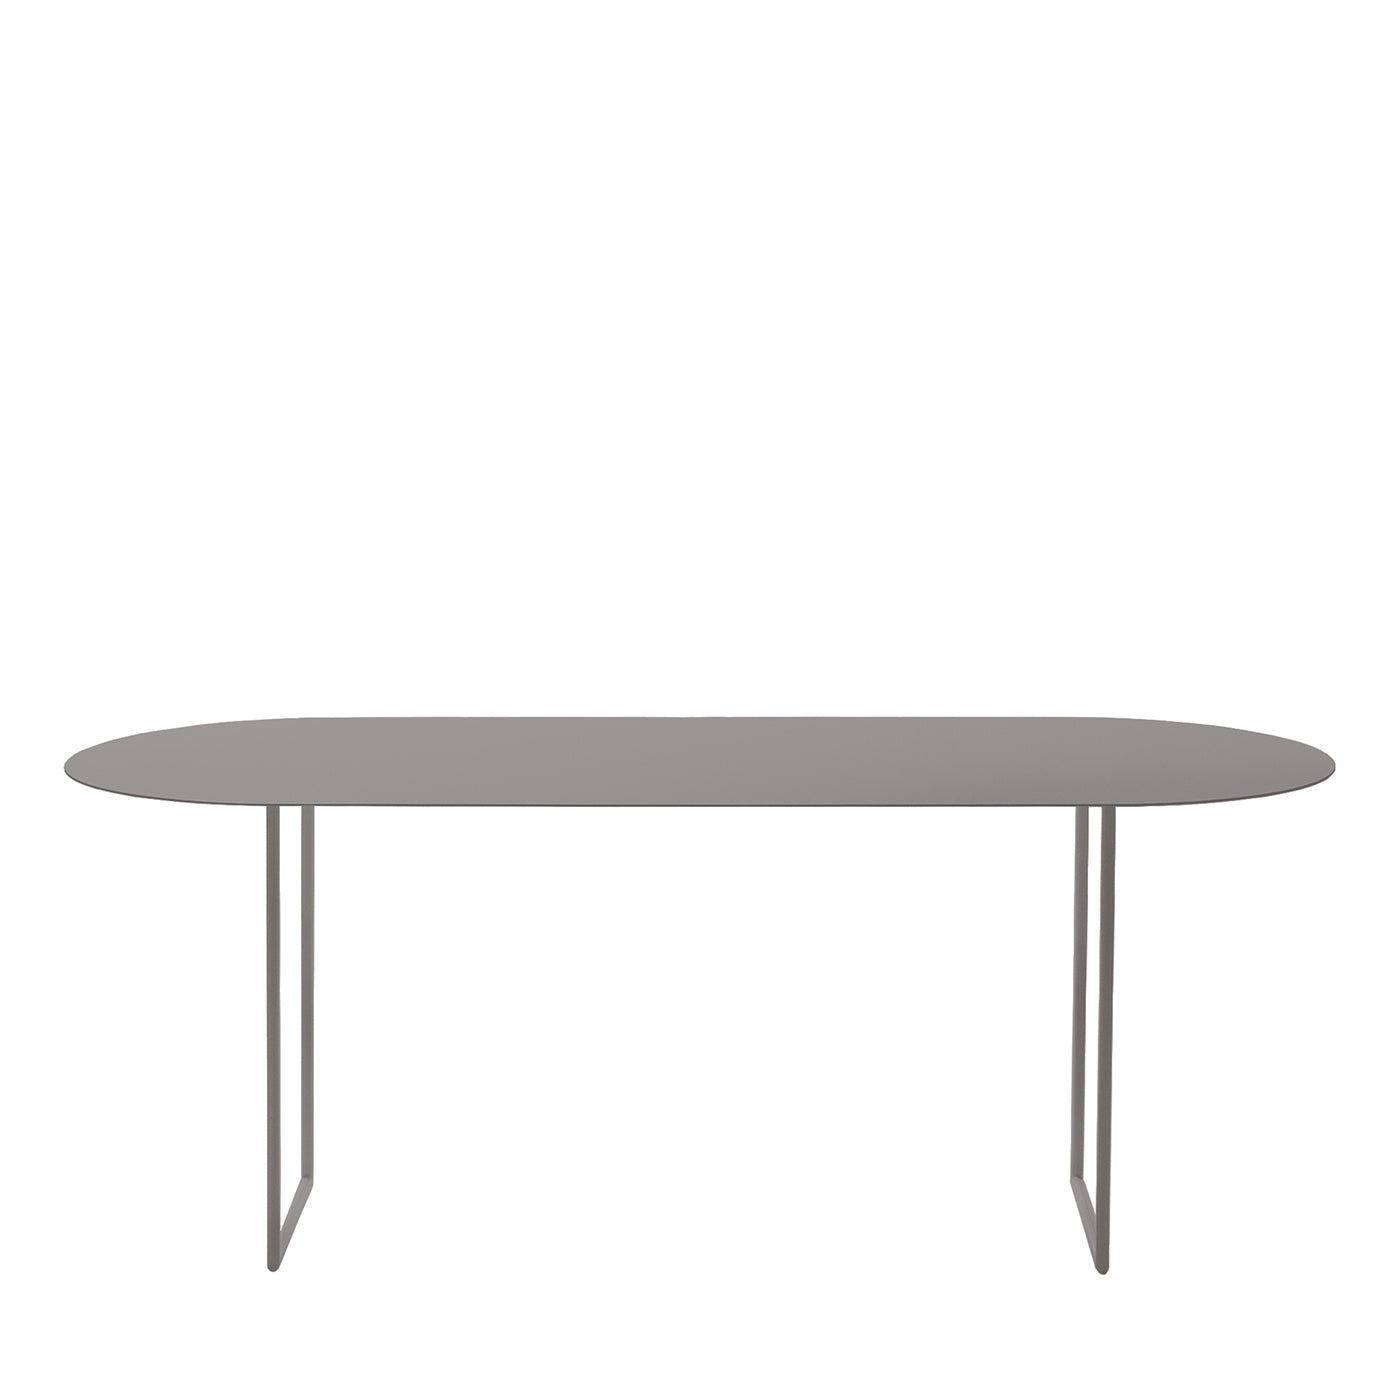 Shine Elliptic Gray Dining Table by Kathrin Charlotte Bohr - Main view